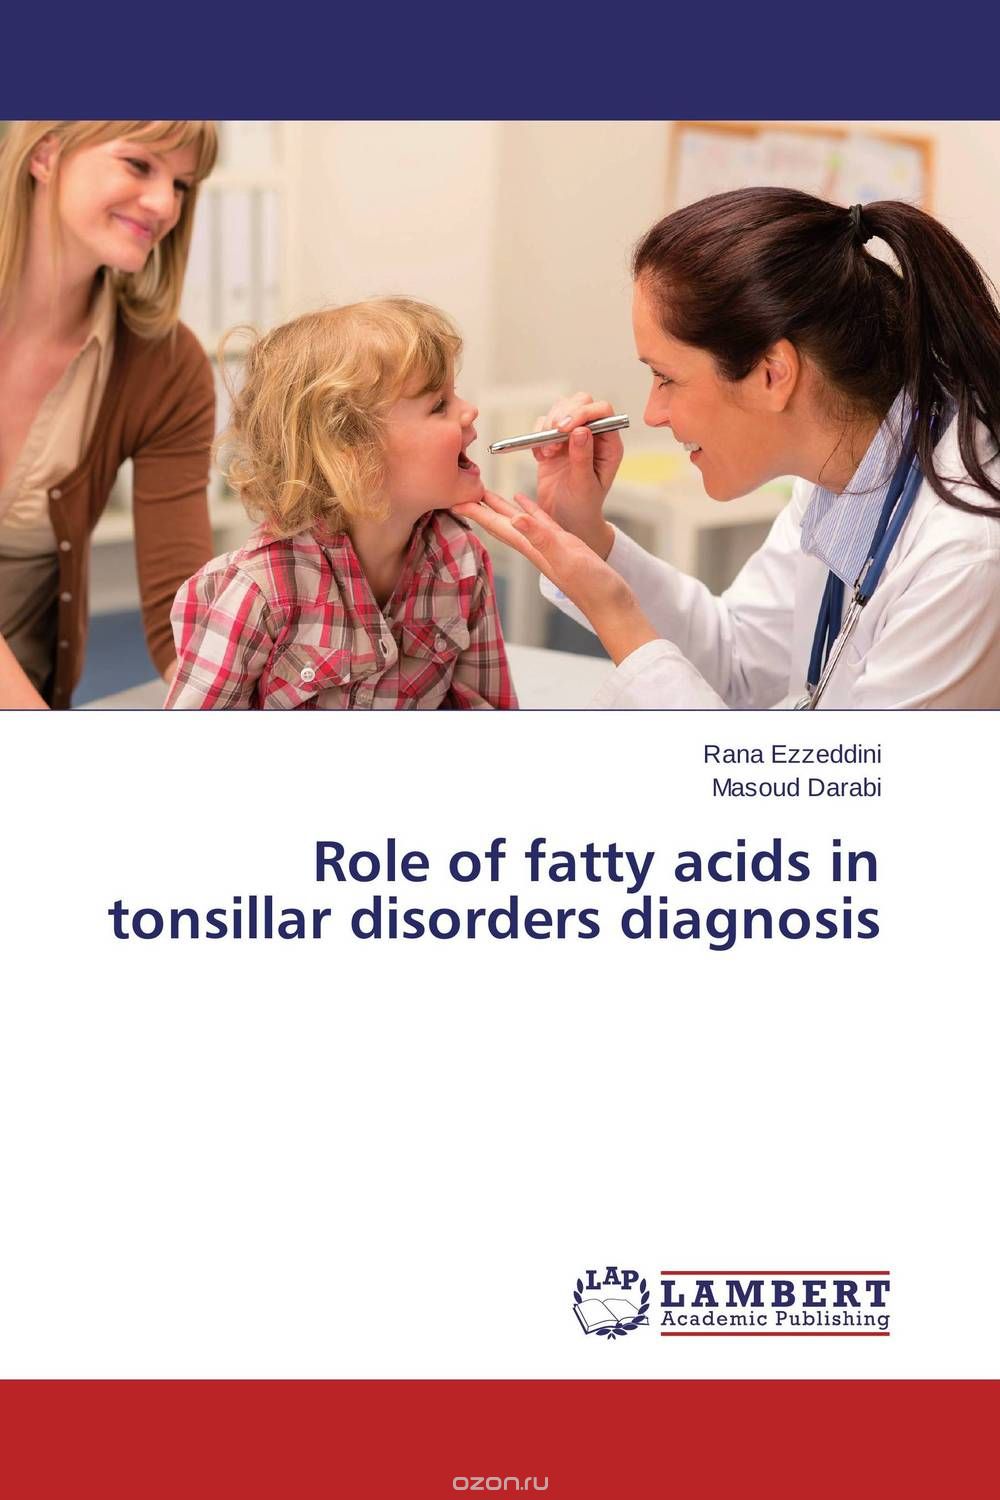 Role of fatty acids in tonsillar disorders diagnosis